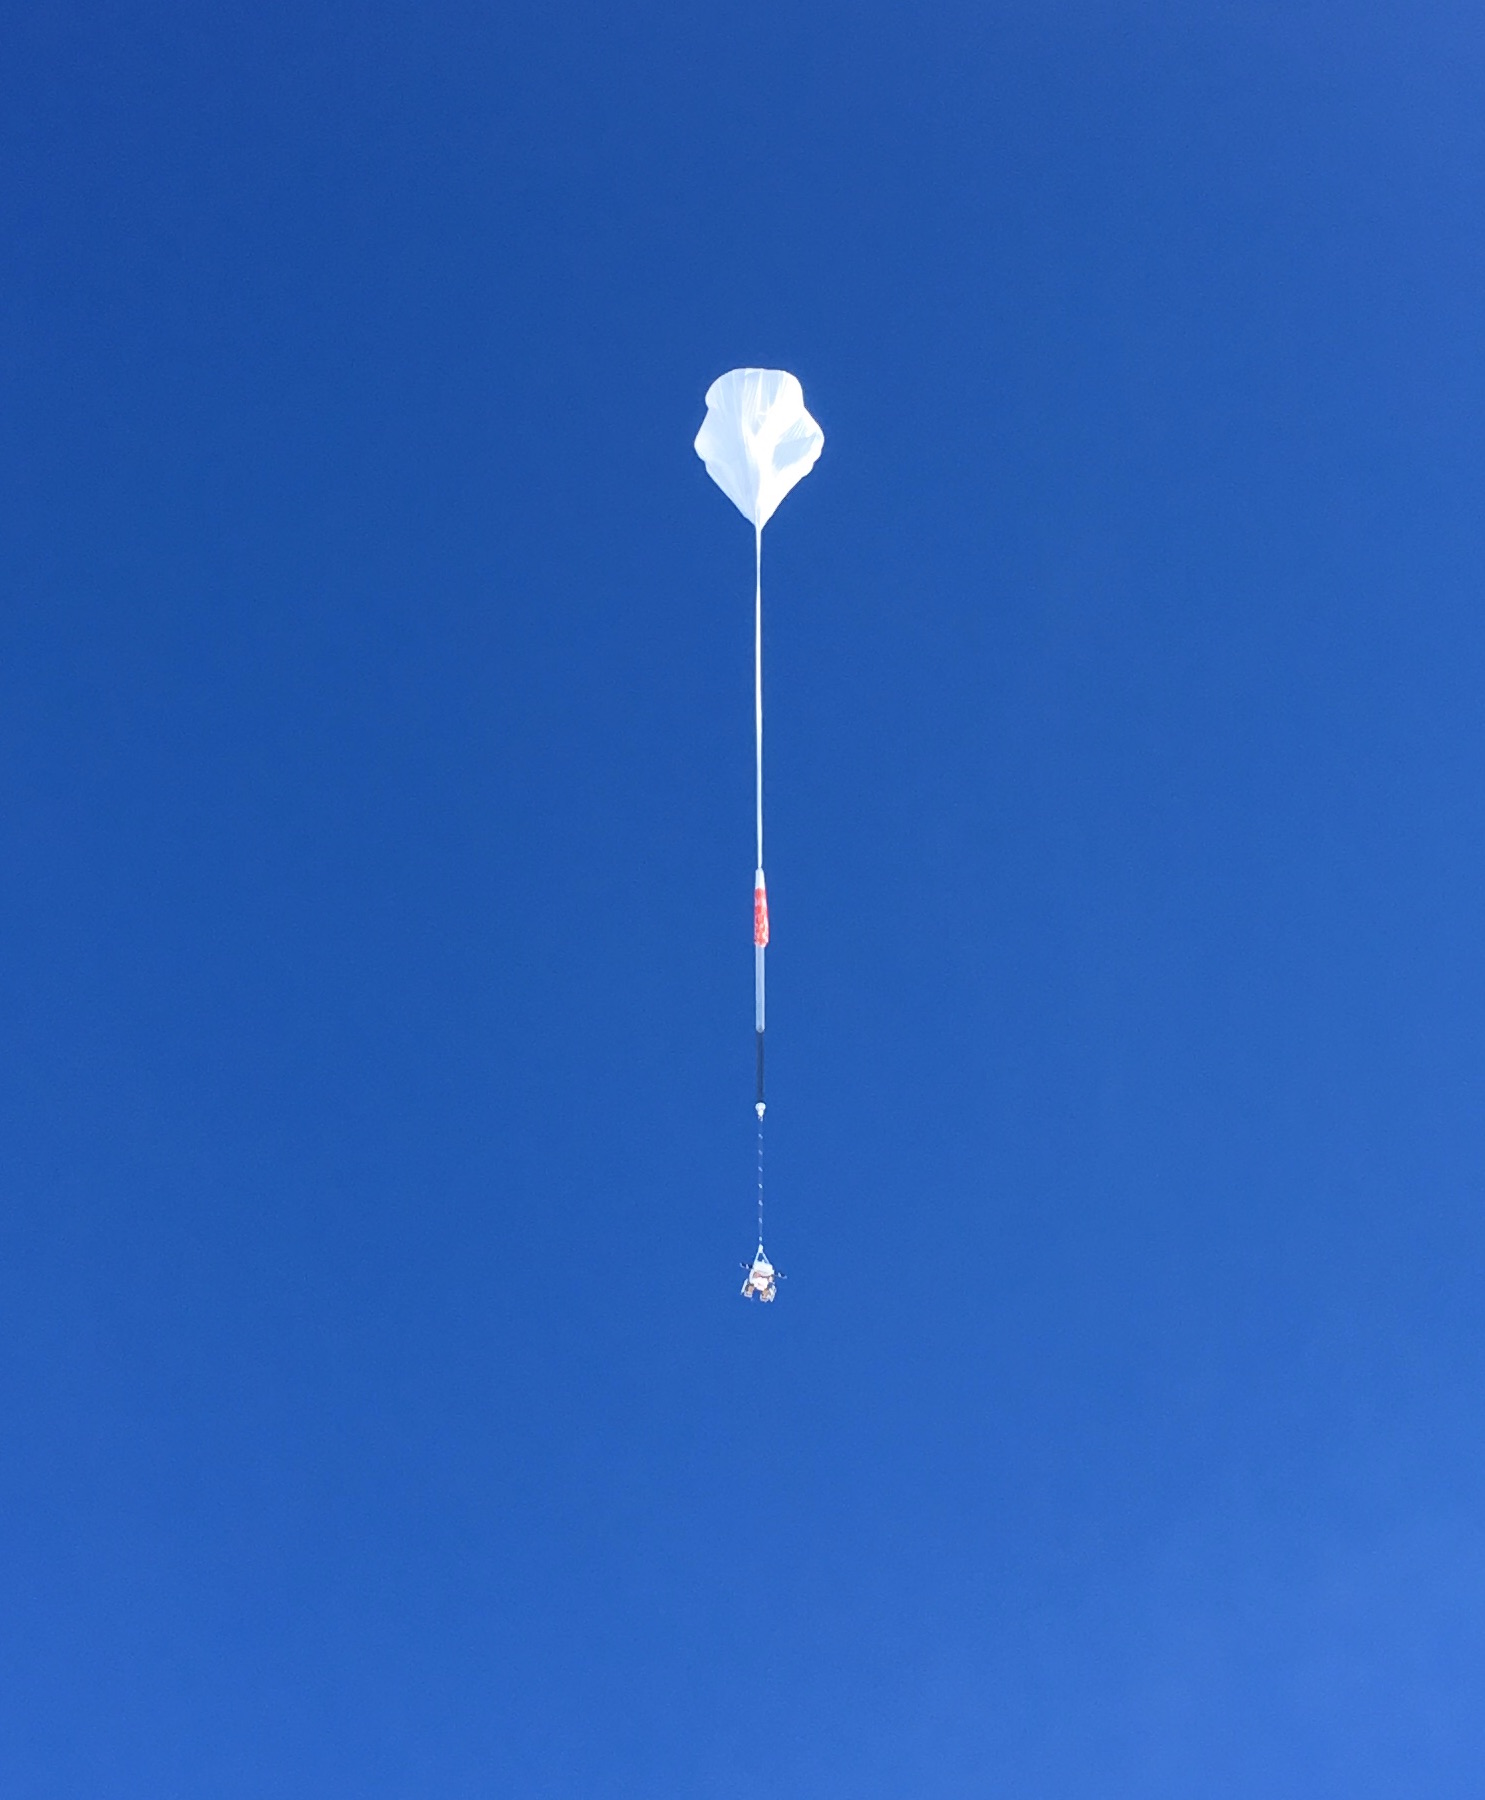 A scientific balloon after take off in the sky, partially inflated.